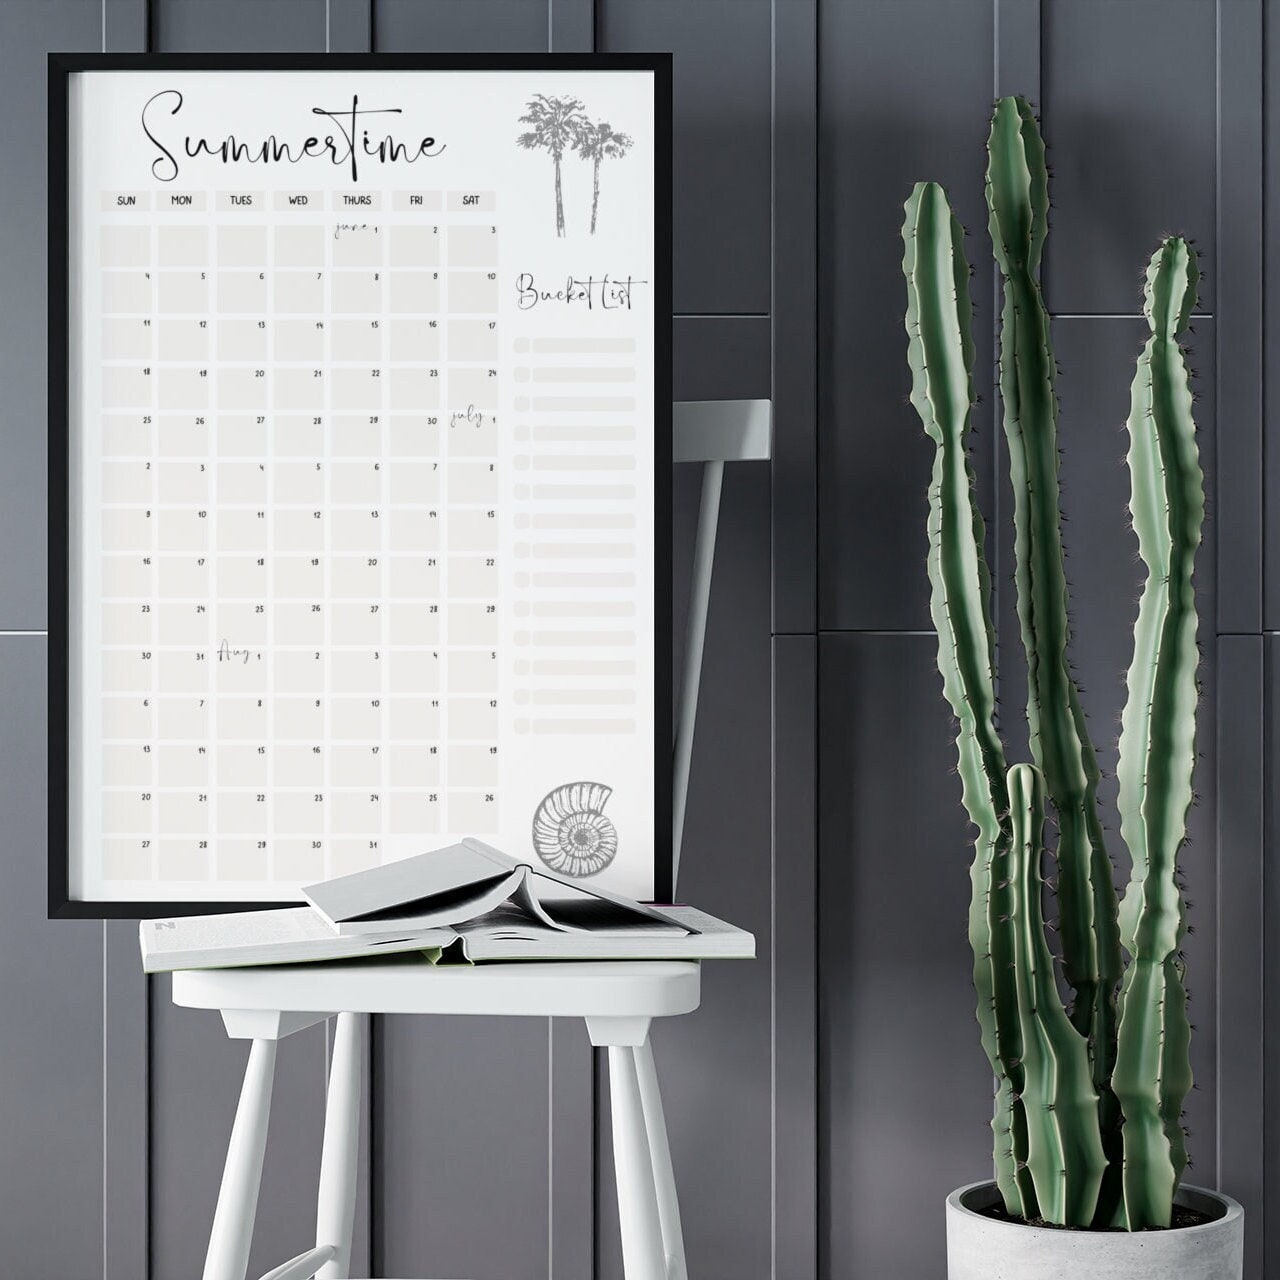 Large Dry Erase Wall Calendar 48 X 74 Undated Blank Reusable Yearly  Calendar Giant Whiteboard Year Poster Laminated Office 